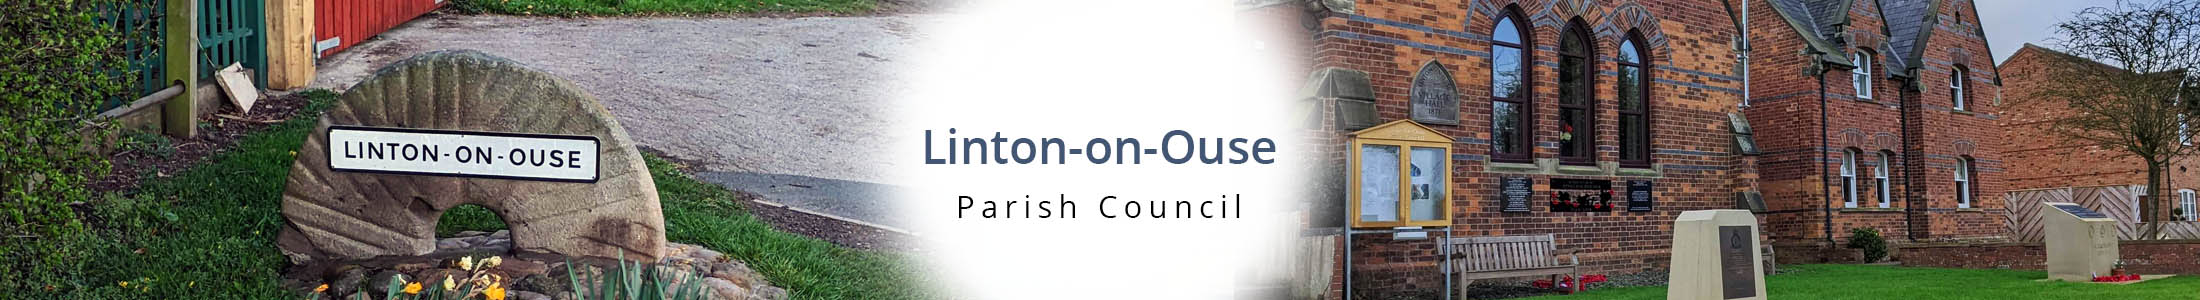 Header Image for Linton-On-Ouse Parish Council